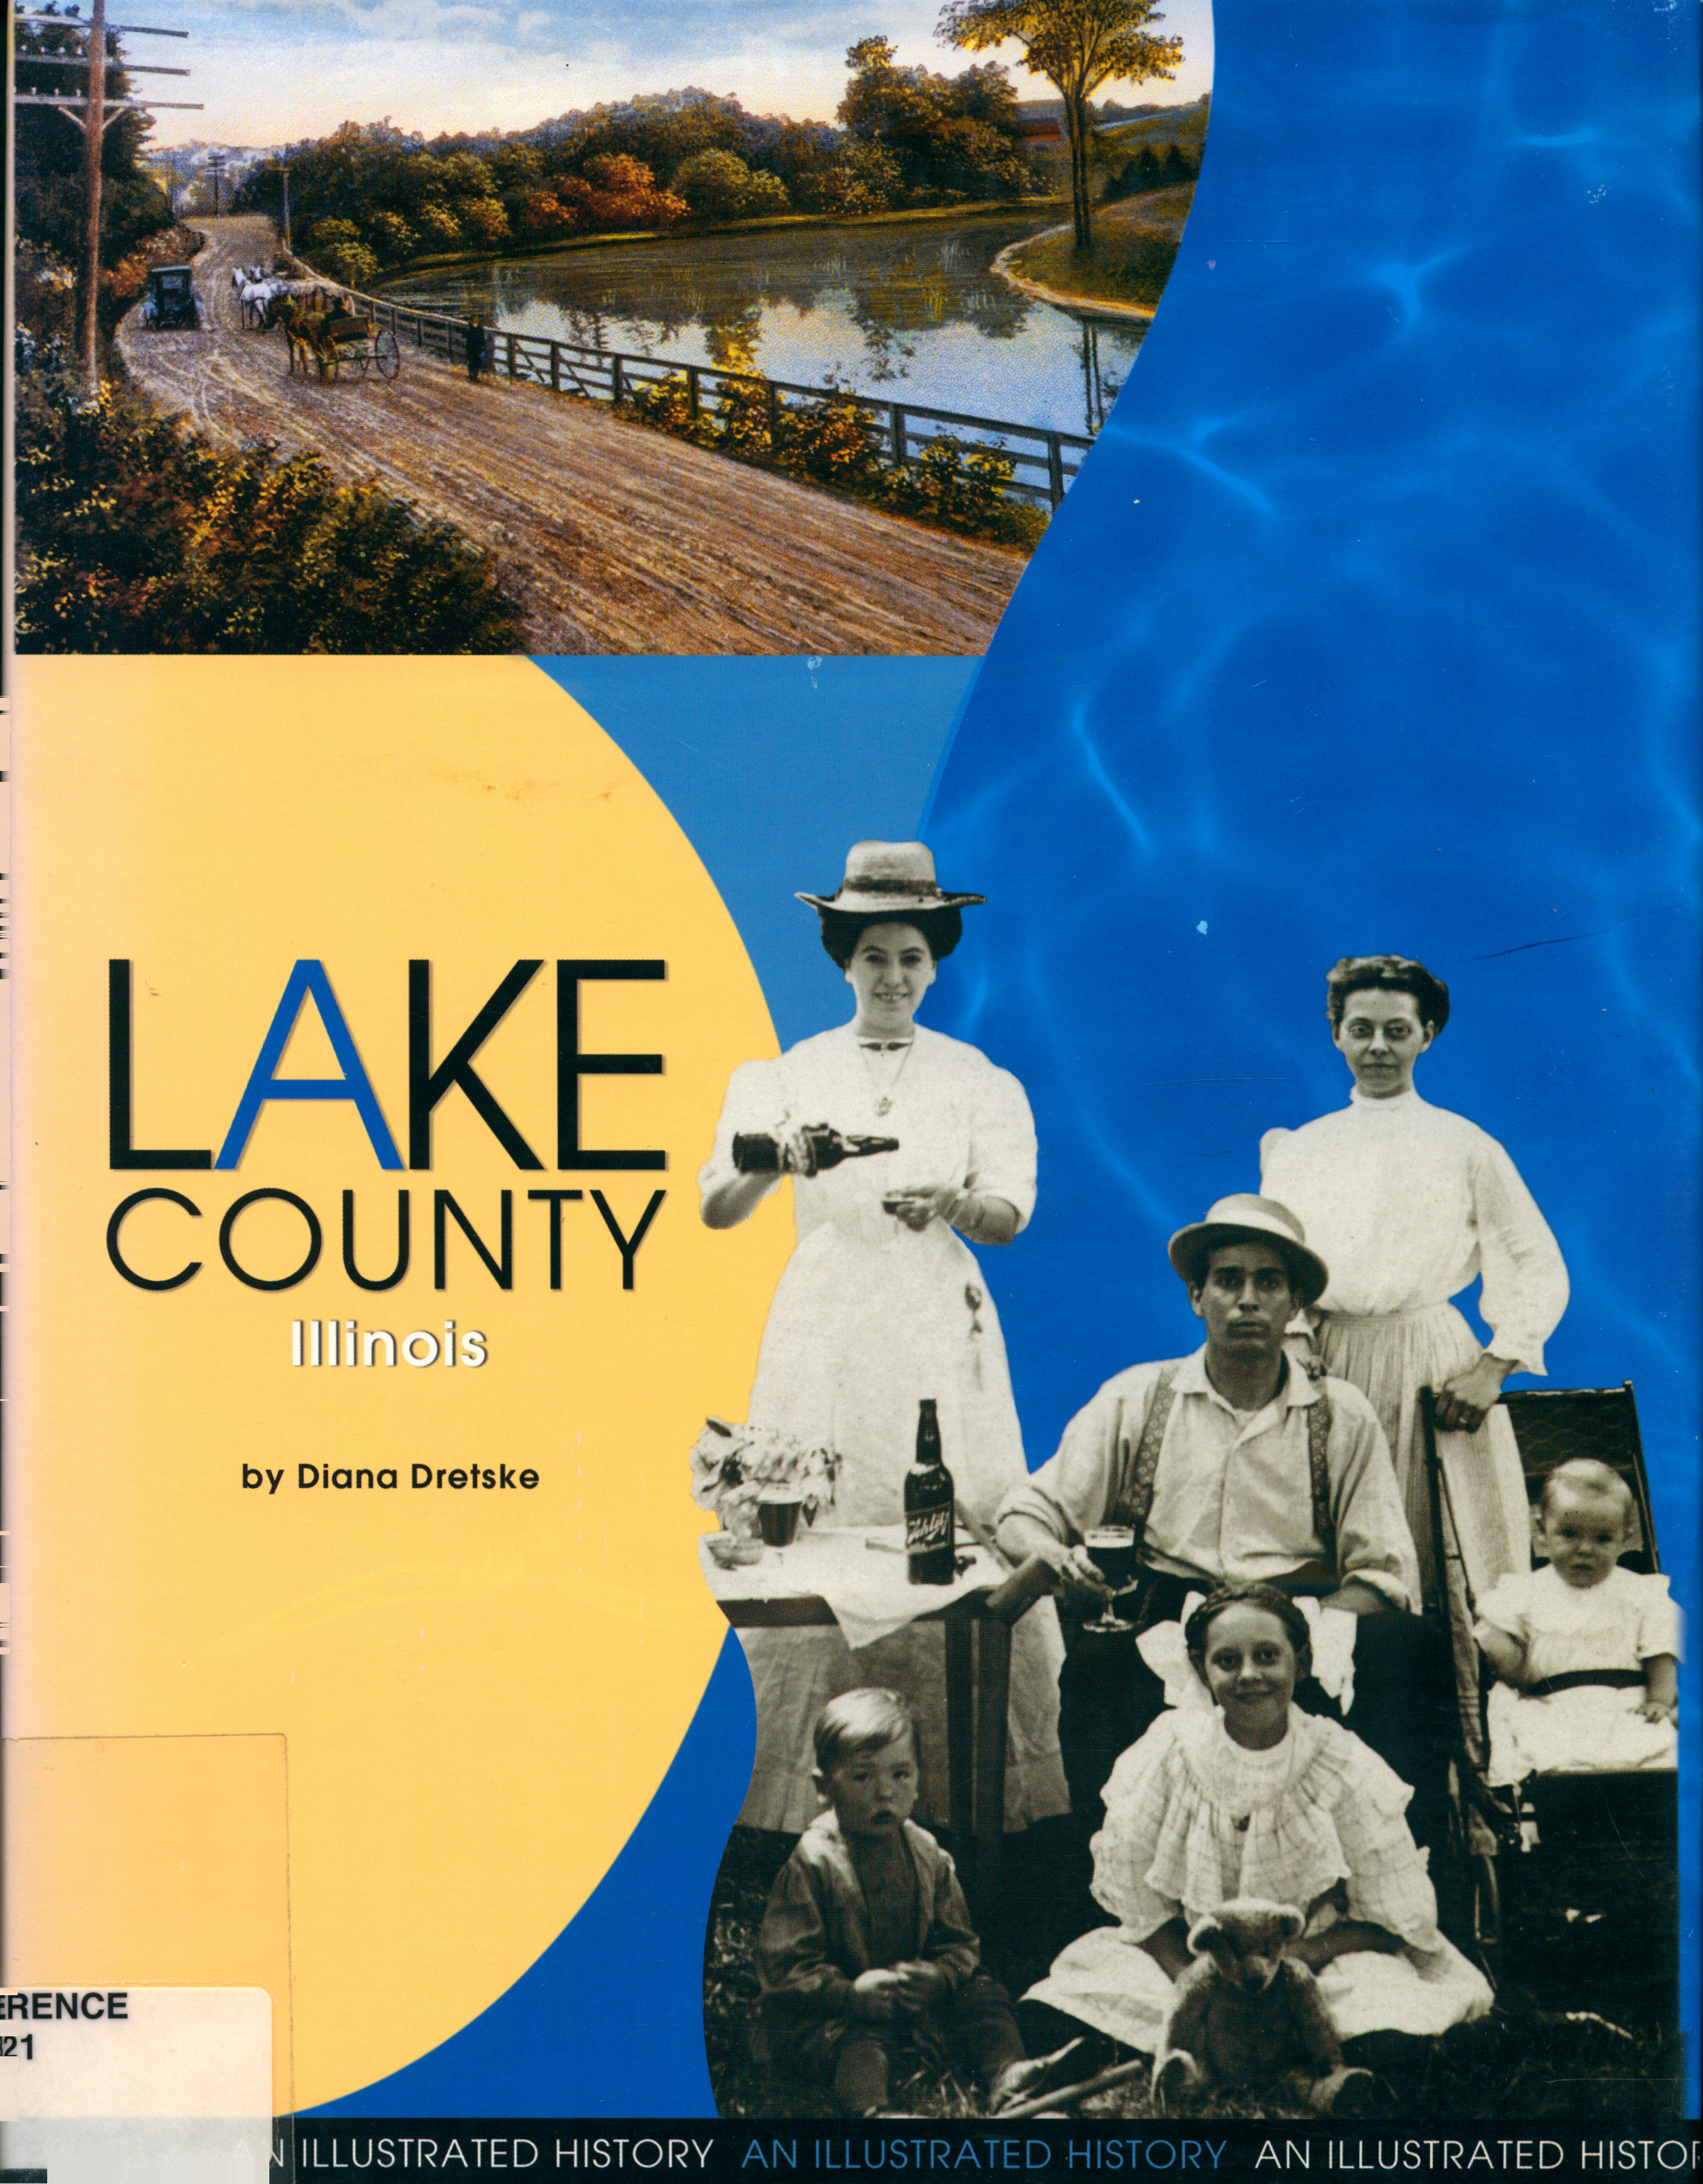 Image for "Lake County, Illinois: an illustrated history"